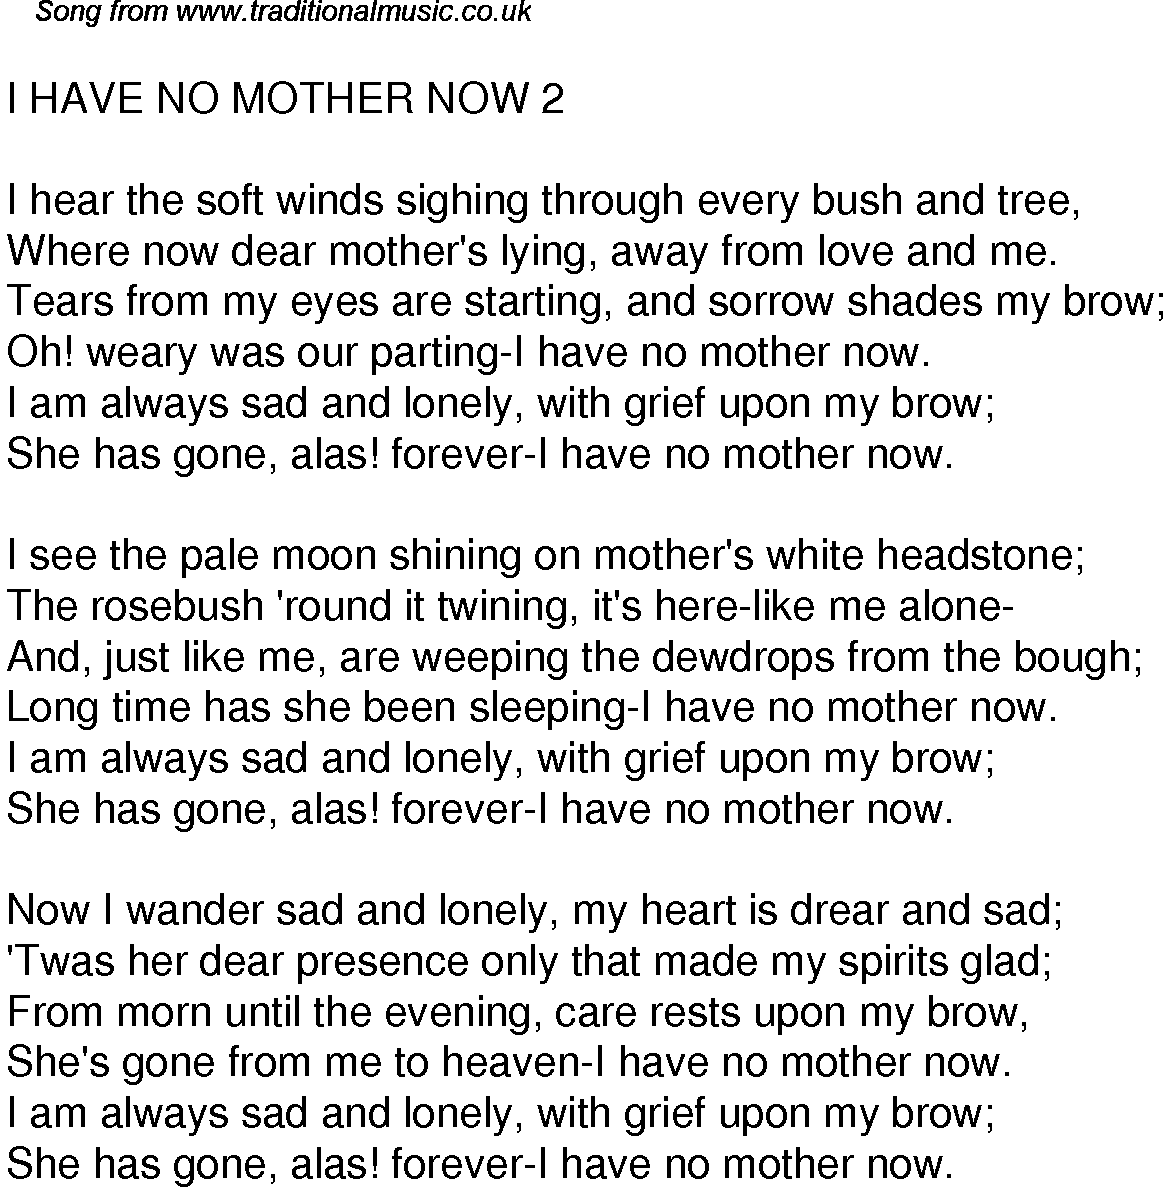 Old Time Song Lyrics For 39 I Have No Mother Now 2